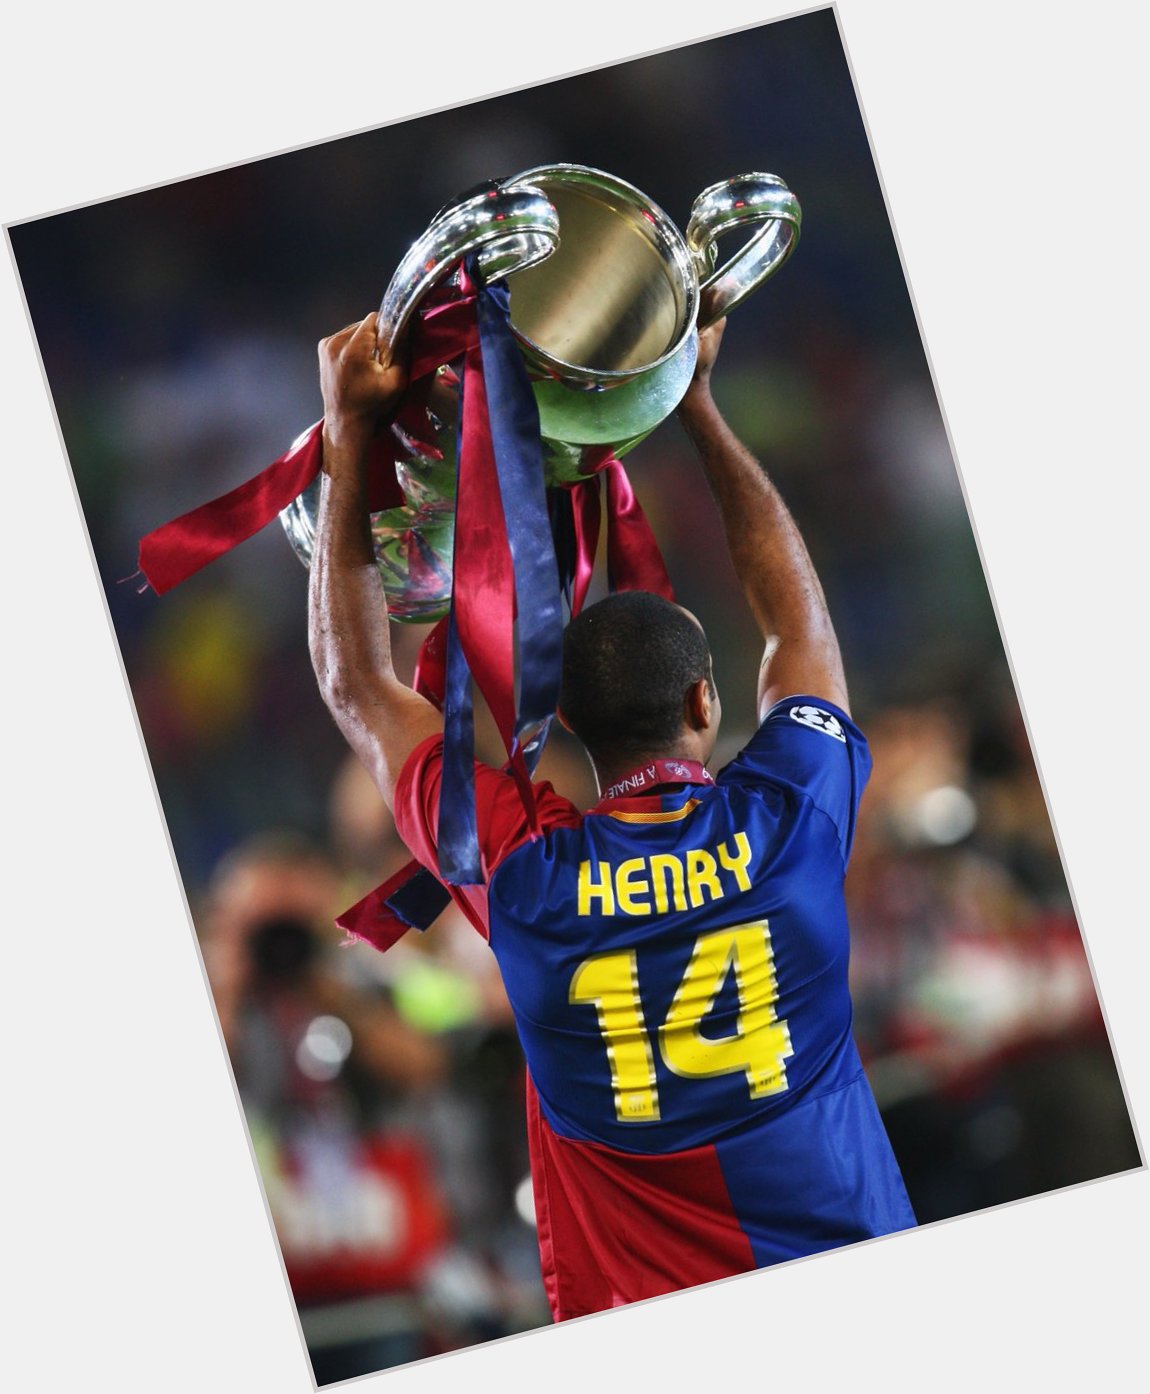 Wish 2009 winner & legend Thierry Henry a happy 40th birthday!   All-time favourite Barcelona forward?  